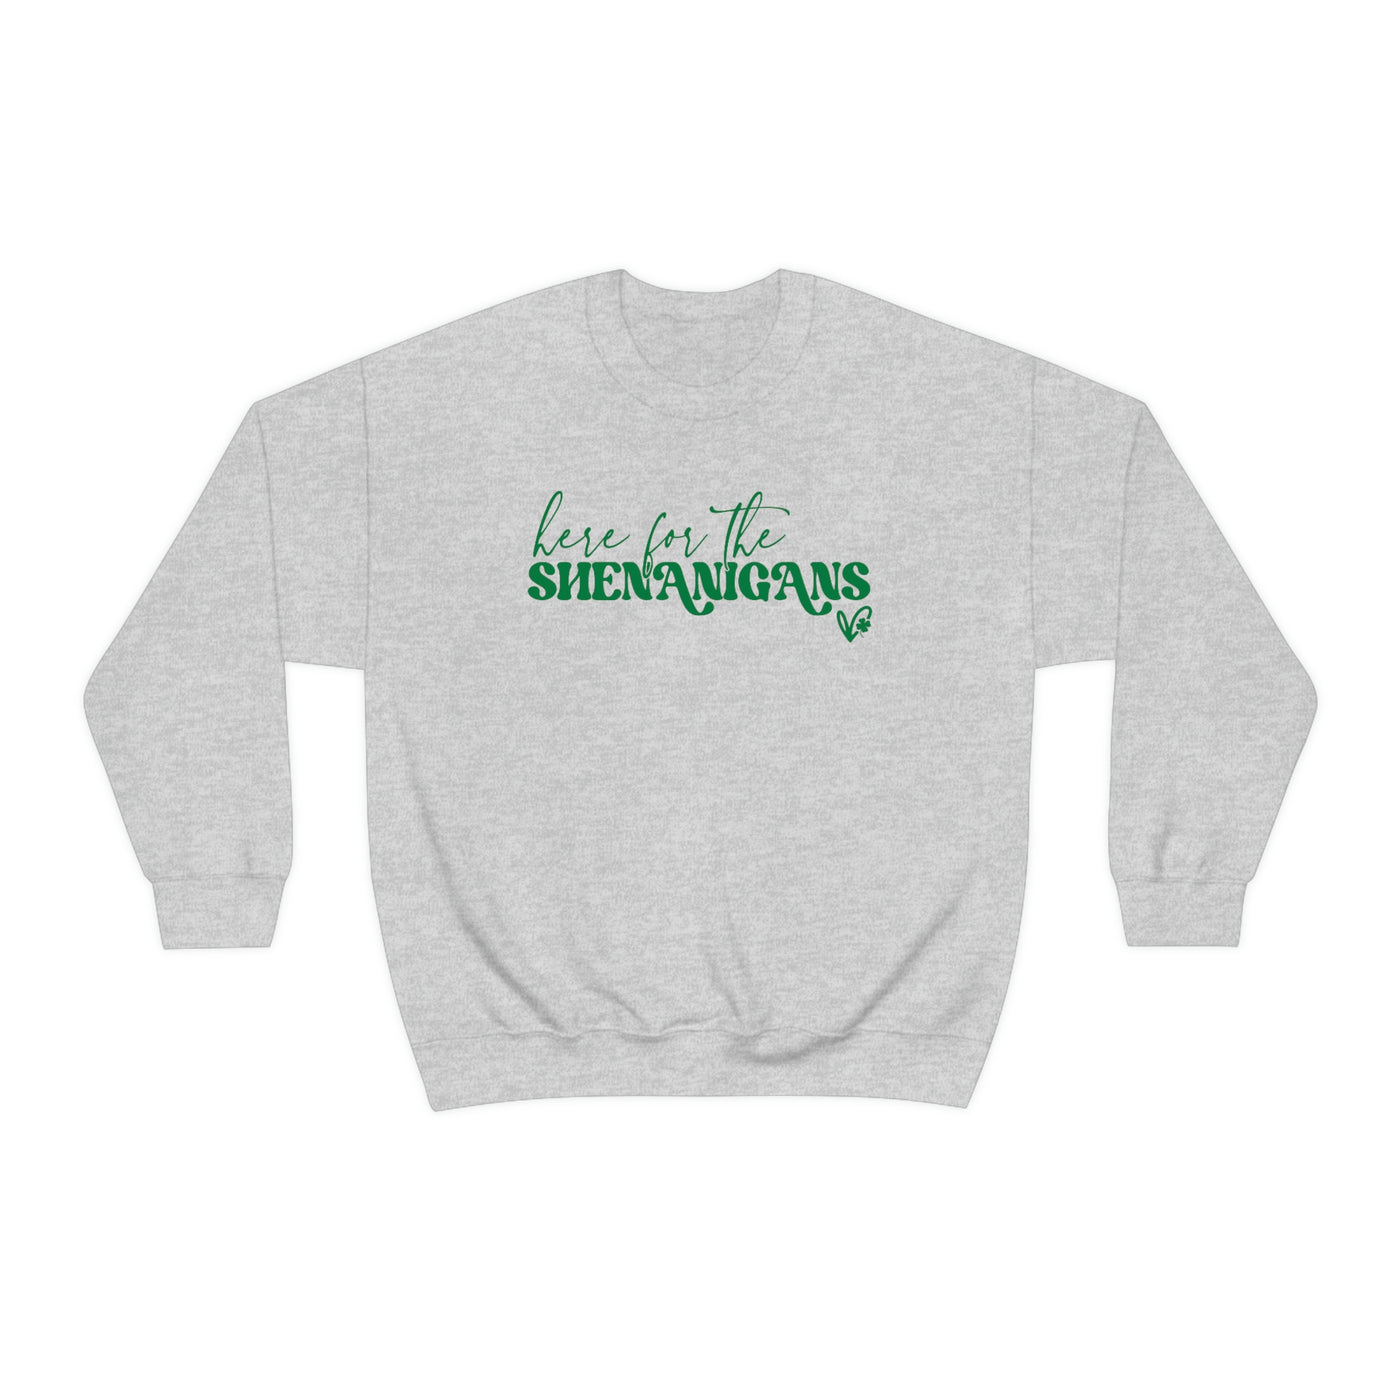 Here for the Shenanigans Crewneck